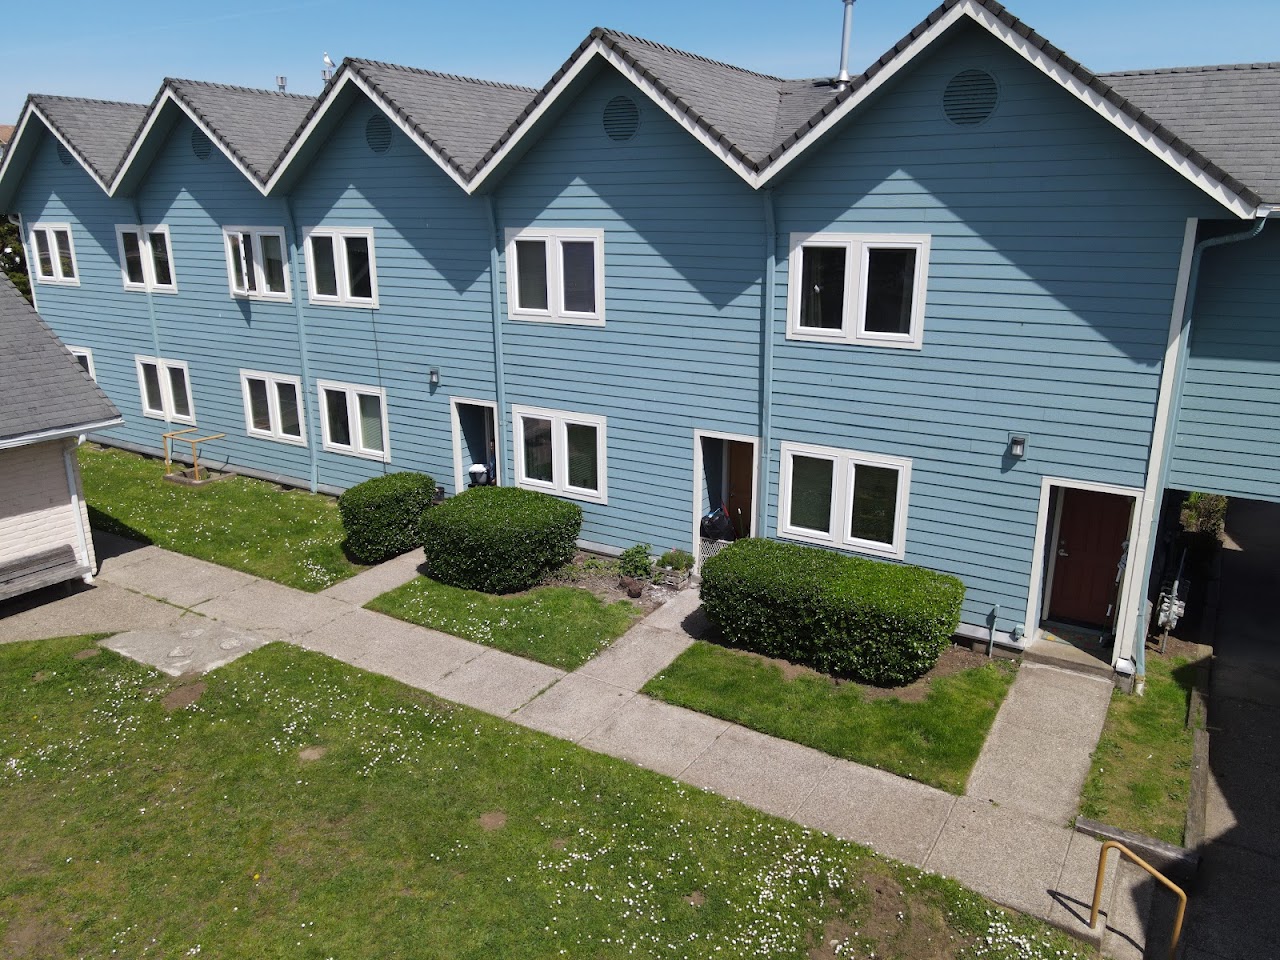 Photo of Housing Authority of Lincoln County. Affordable housing located at 1039 NW NYE Street NEWPORT, OR 97365